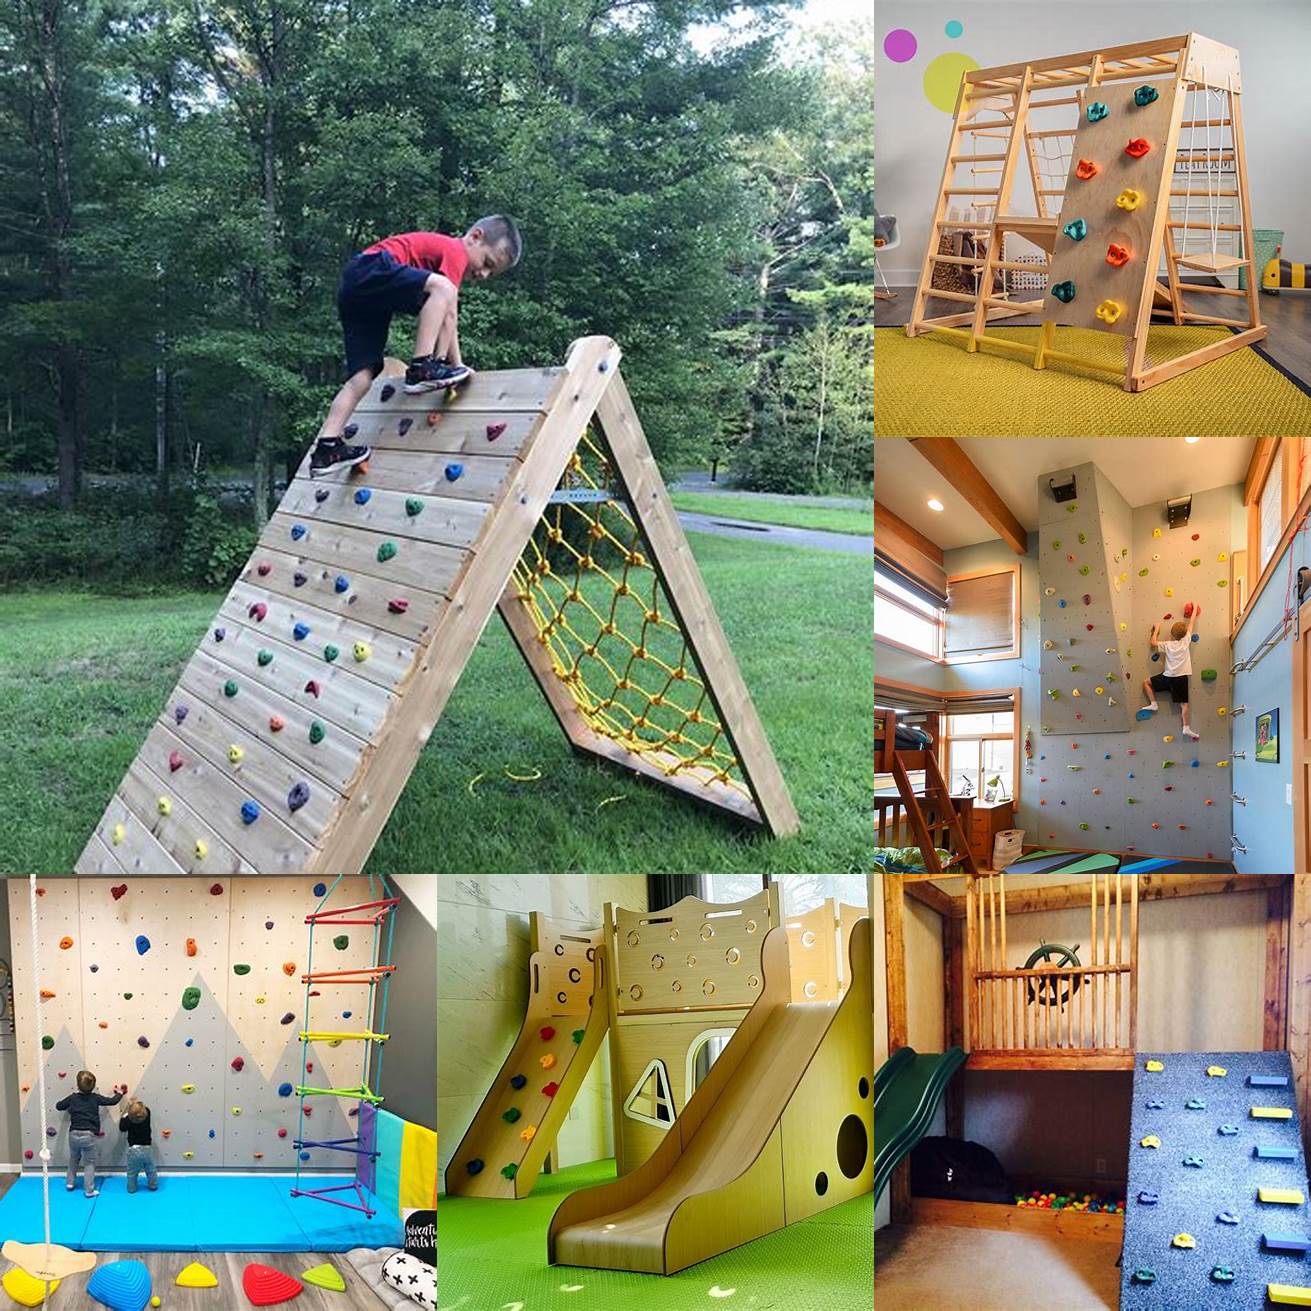 3 Indoor Playground with Slide and Climbing Wall